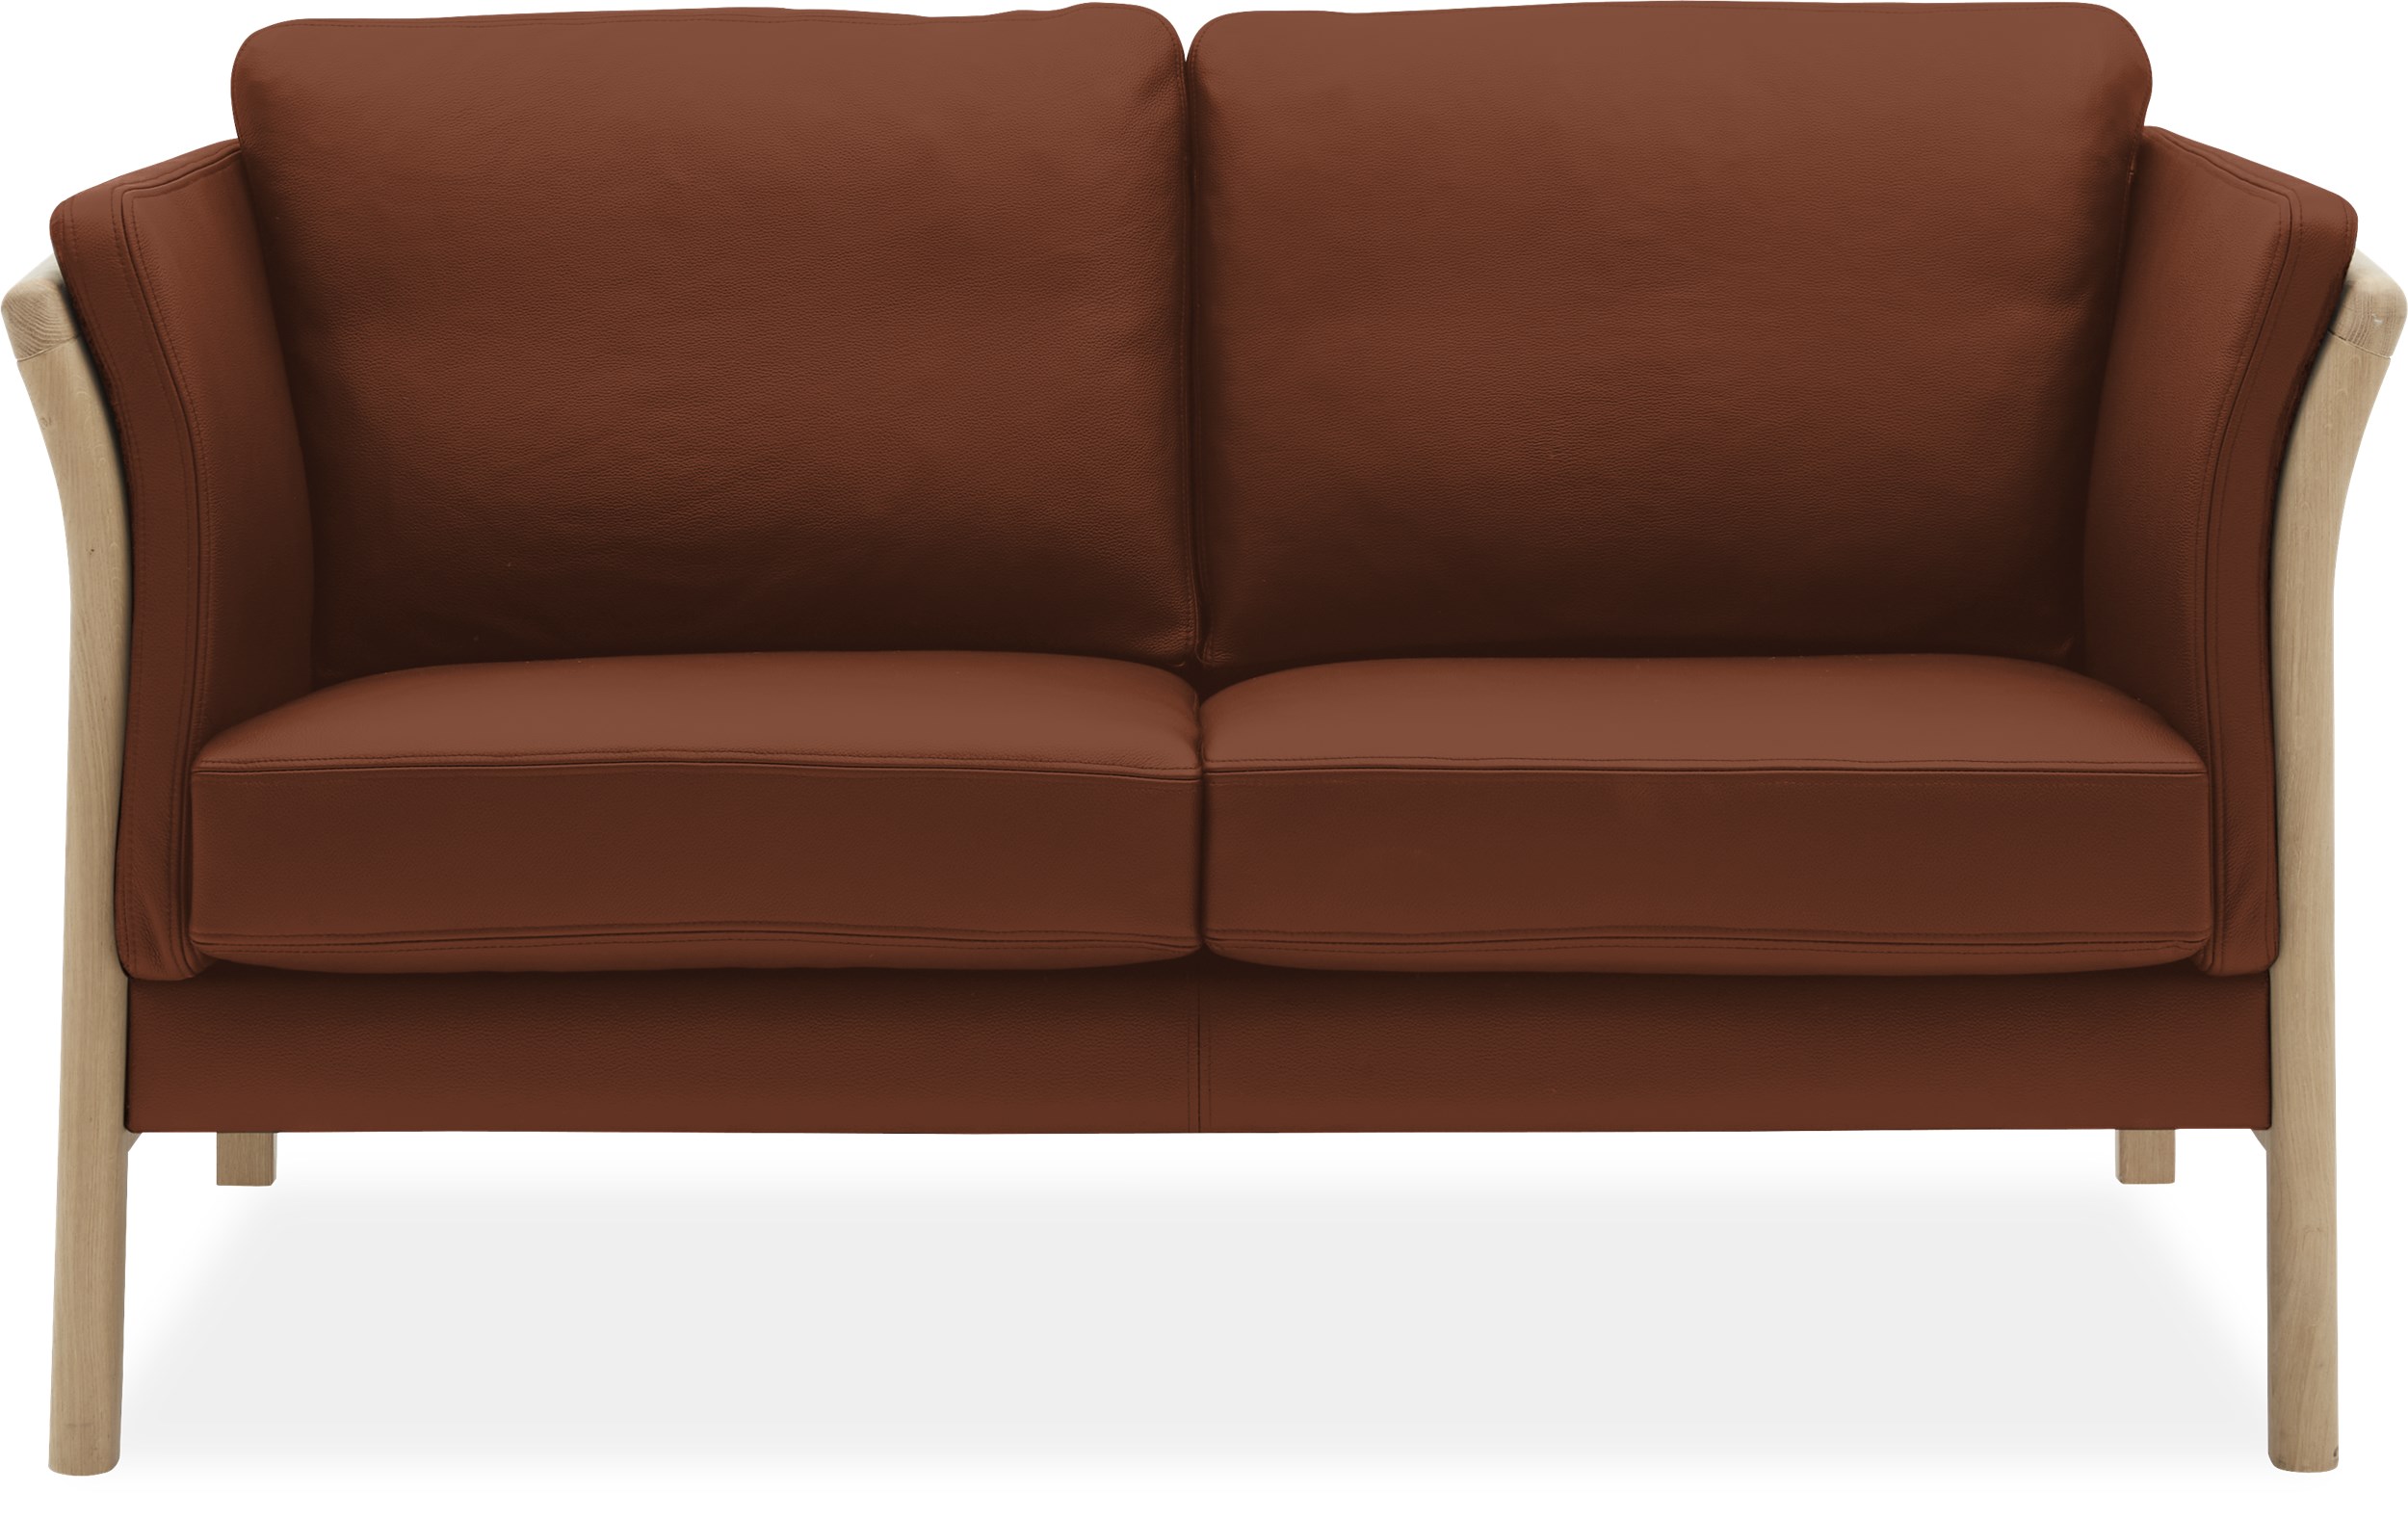 Absalon 2 pers. Sofa 